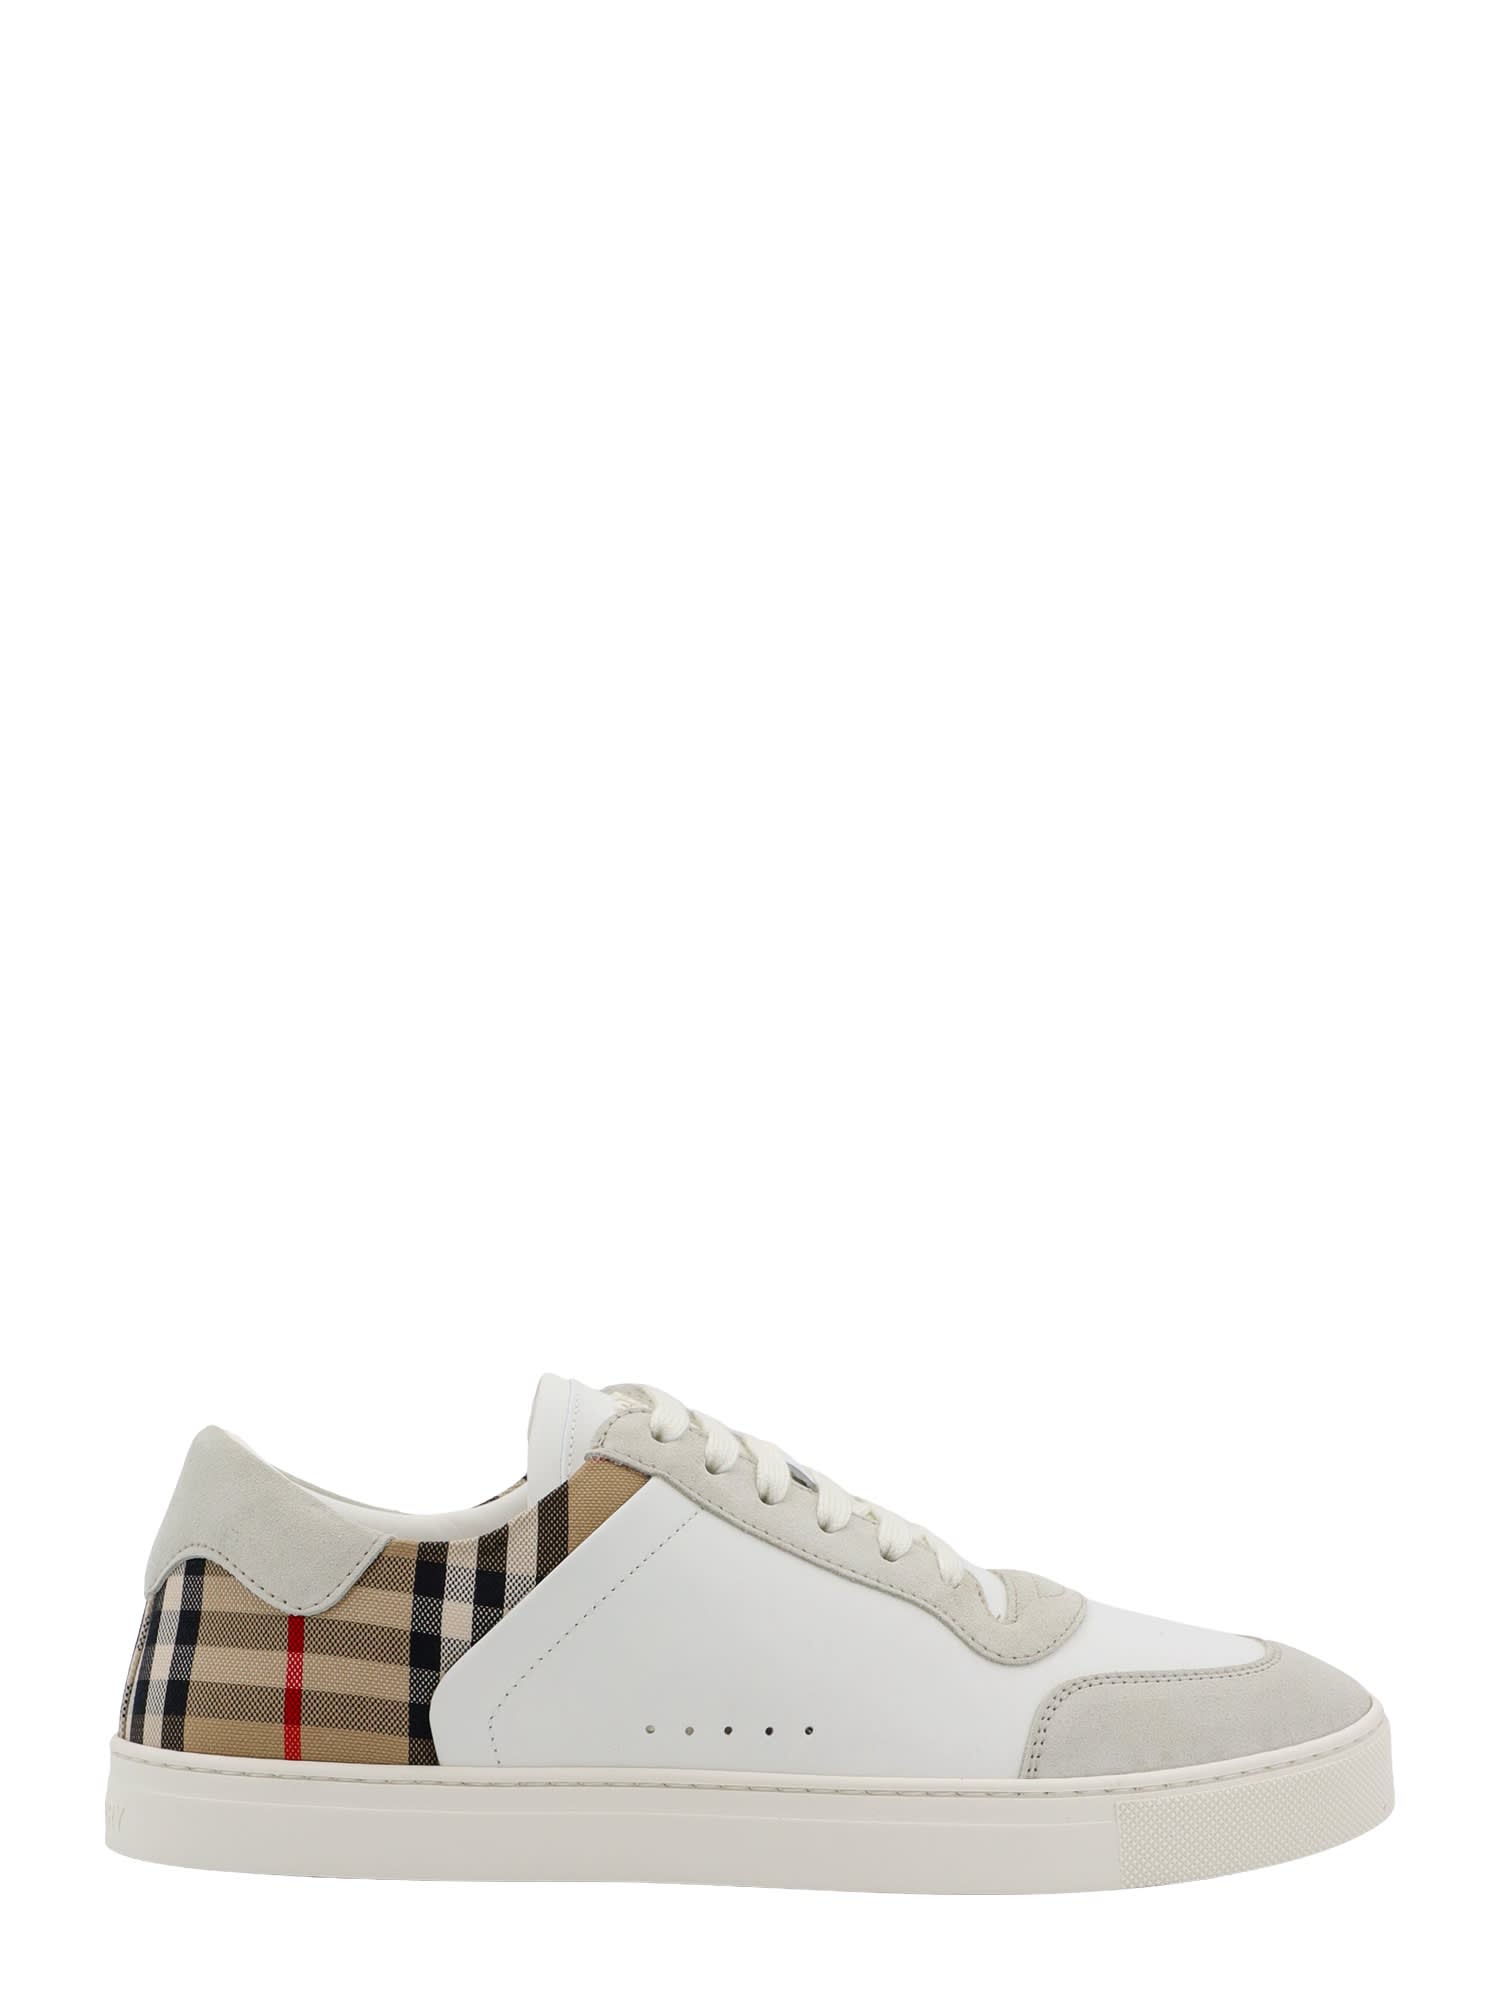 Burberry Sneakers In Neutral